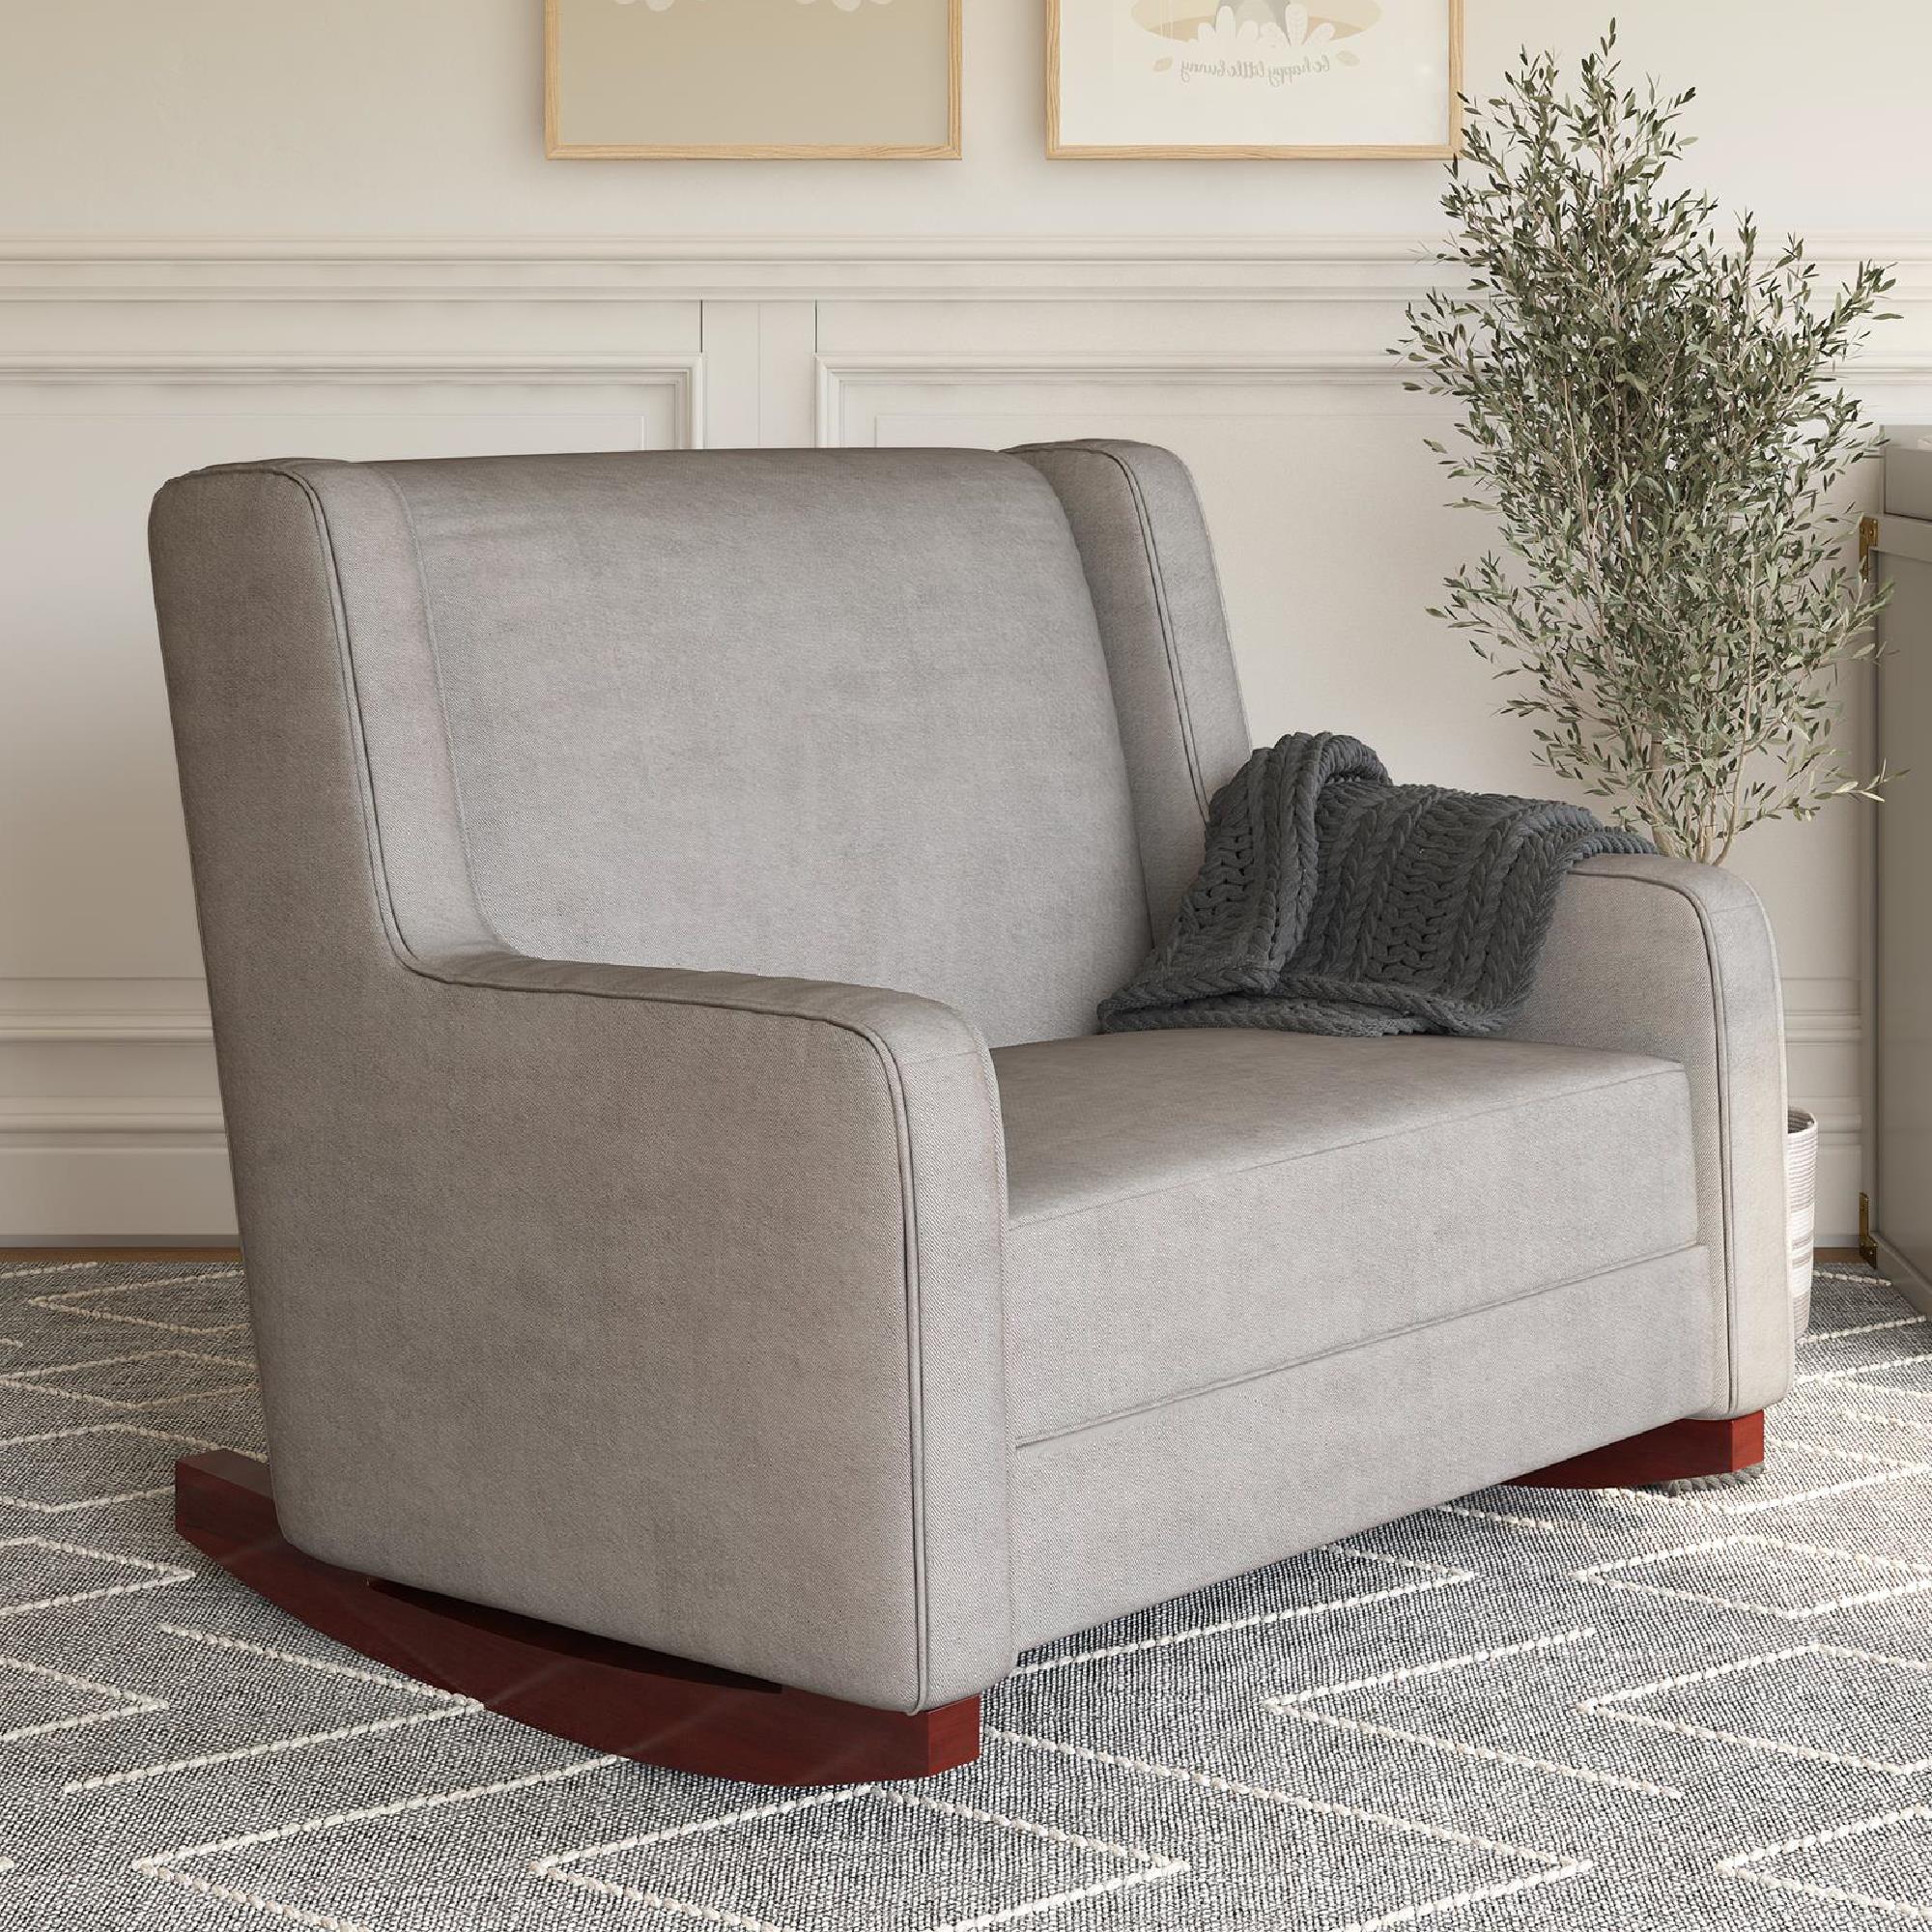 Baby Relax Hadley Upholstered Double Rocker Chair, Taupe Microfiber - image 1 of 15